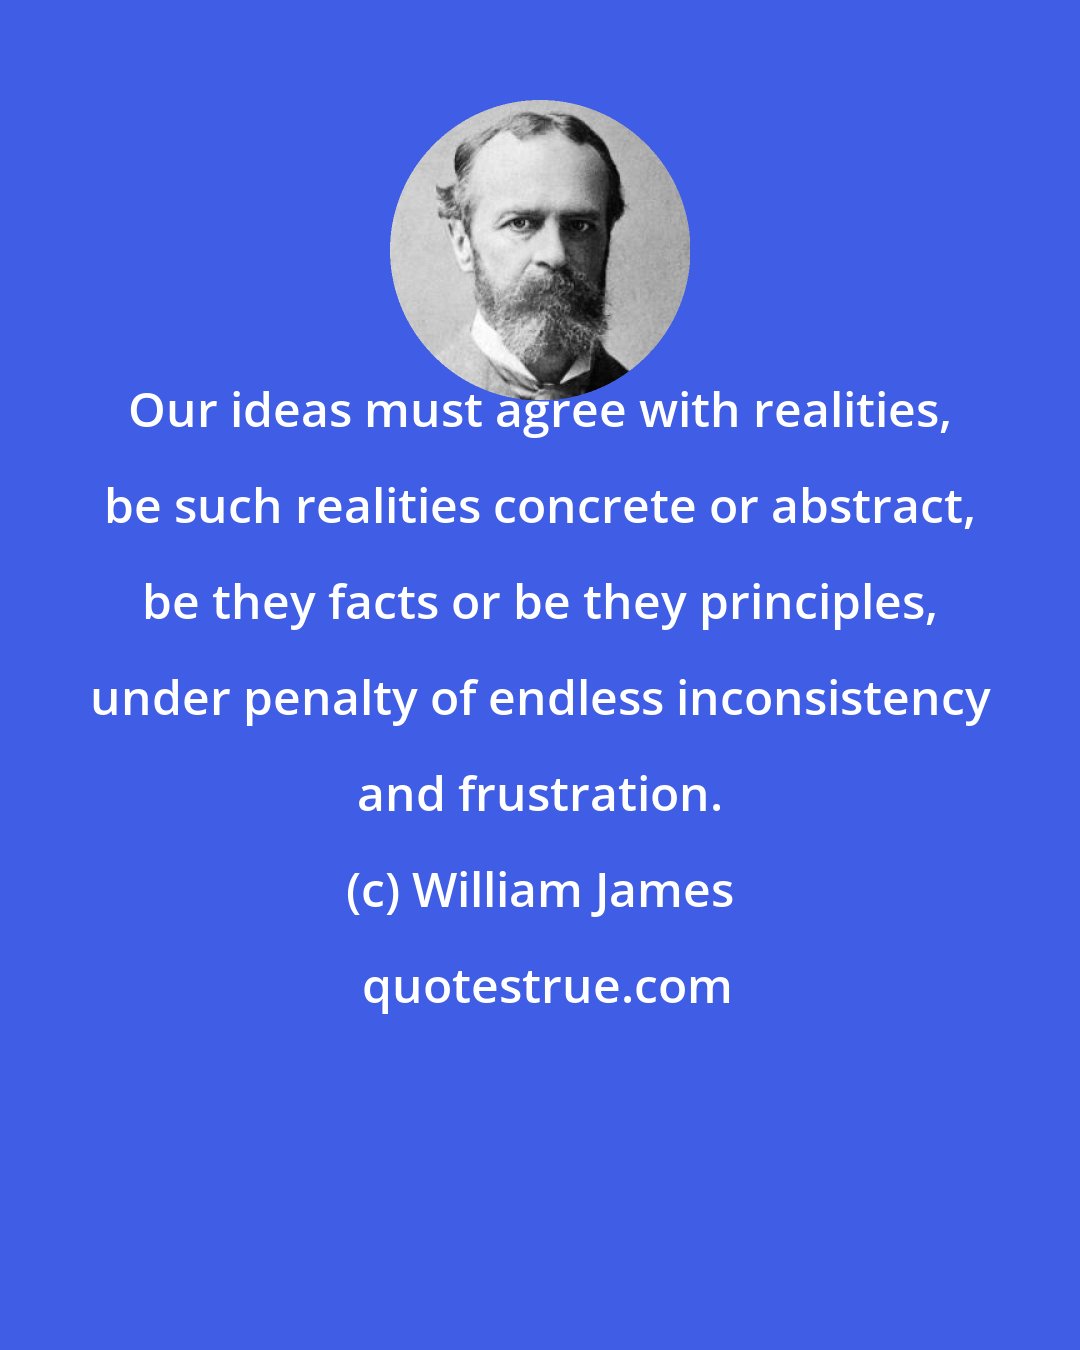 William James: Our ideas must agree with realities, be such realities concrete or abstract, be they facts or be they principles, under penalty of endless inconsistency and frustration.